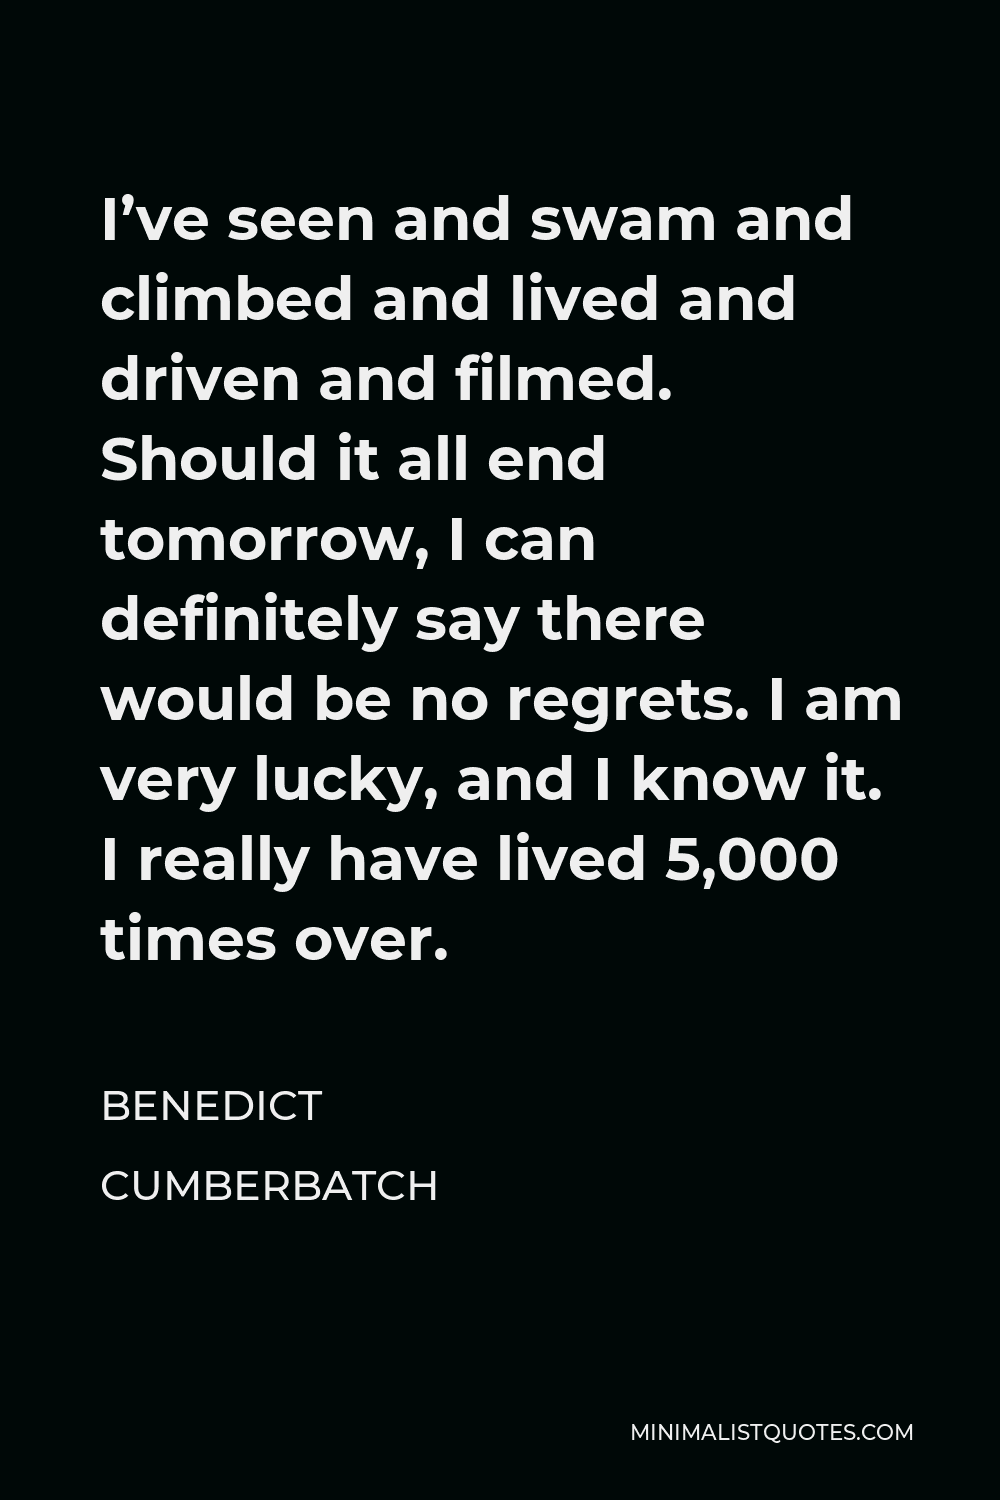 Benedict Cumberbatch Quote - I’ve seen and swam and climbed and lived and driven and filmed. Should it all end tomorrow, I can definitely say there would be no regrets. I am very lucky, and I know it. I really have lived 5,000 times over.